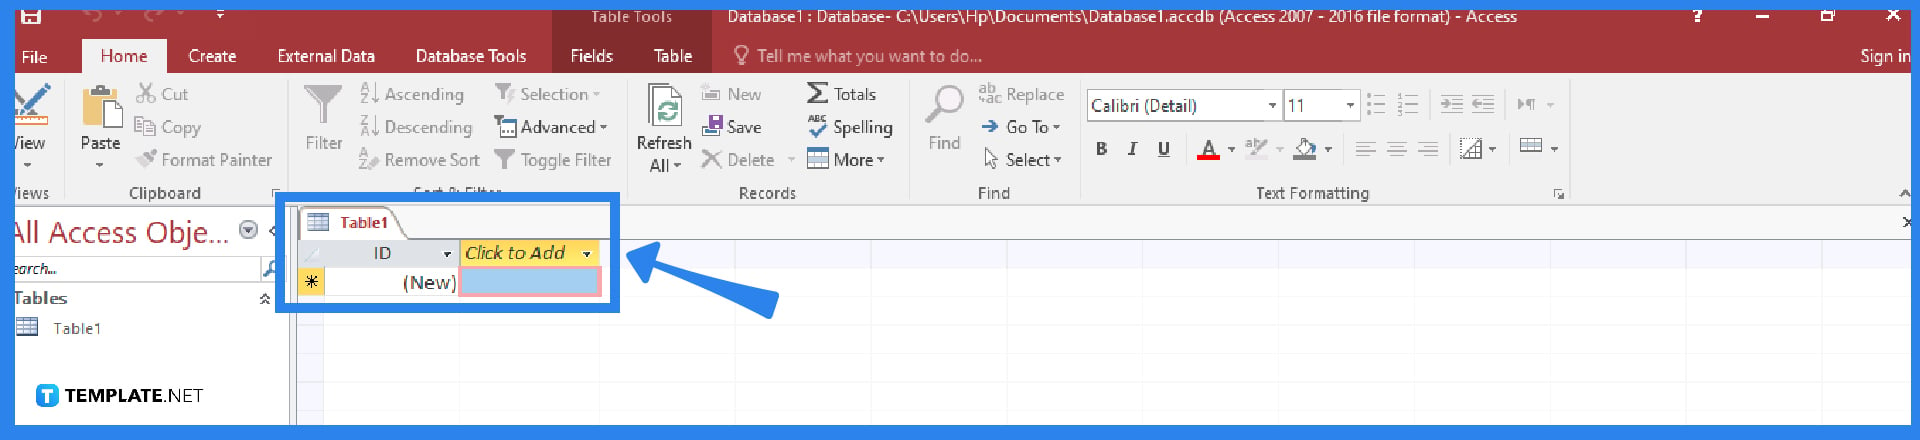 how-to-search-and-protect-data-using-microsoft-access-step-1